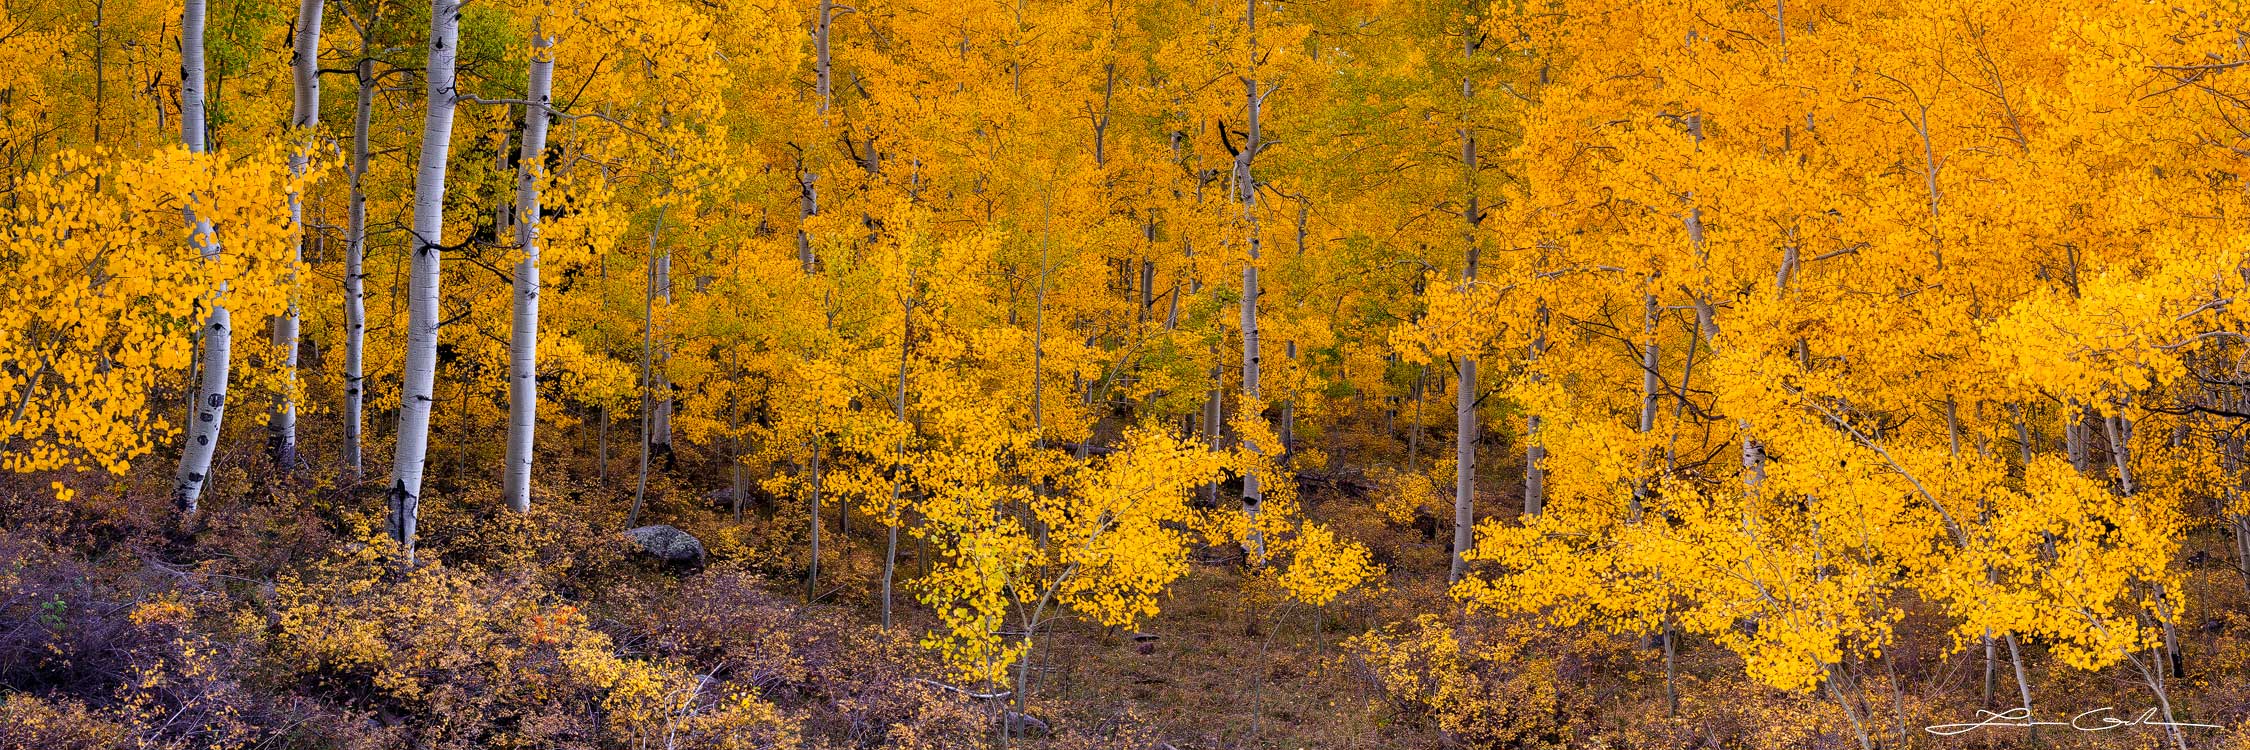 Golden Colorado aspens in a beautiful tree grove and white tree trunks